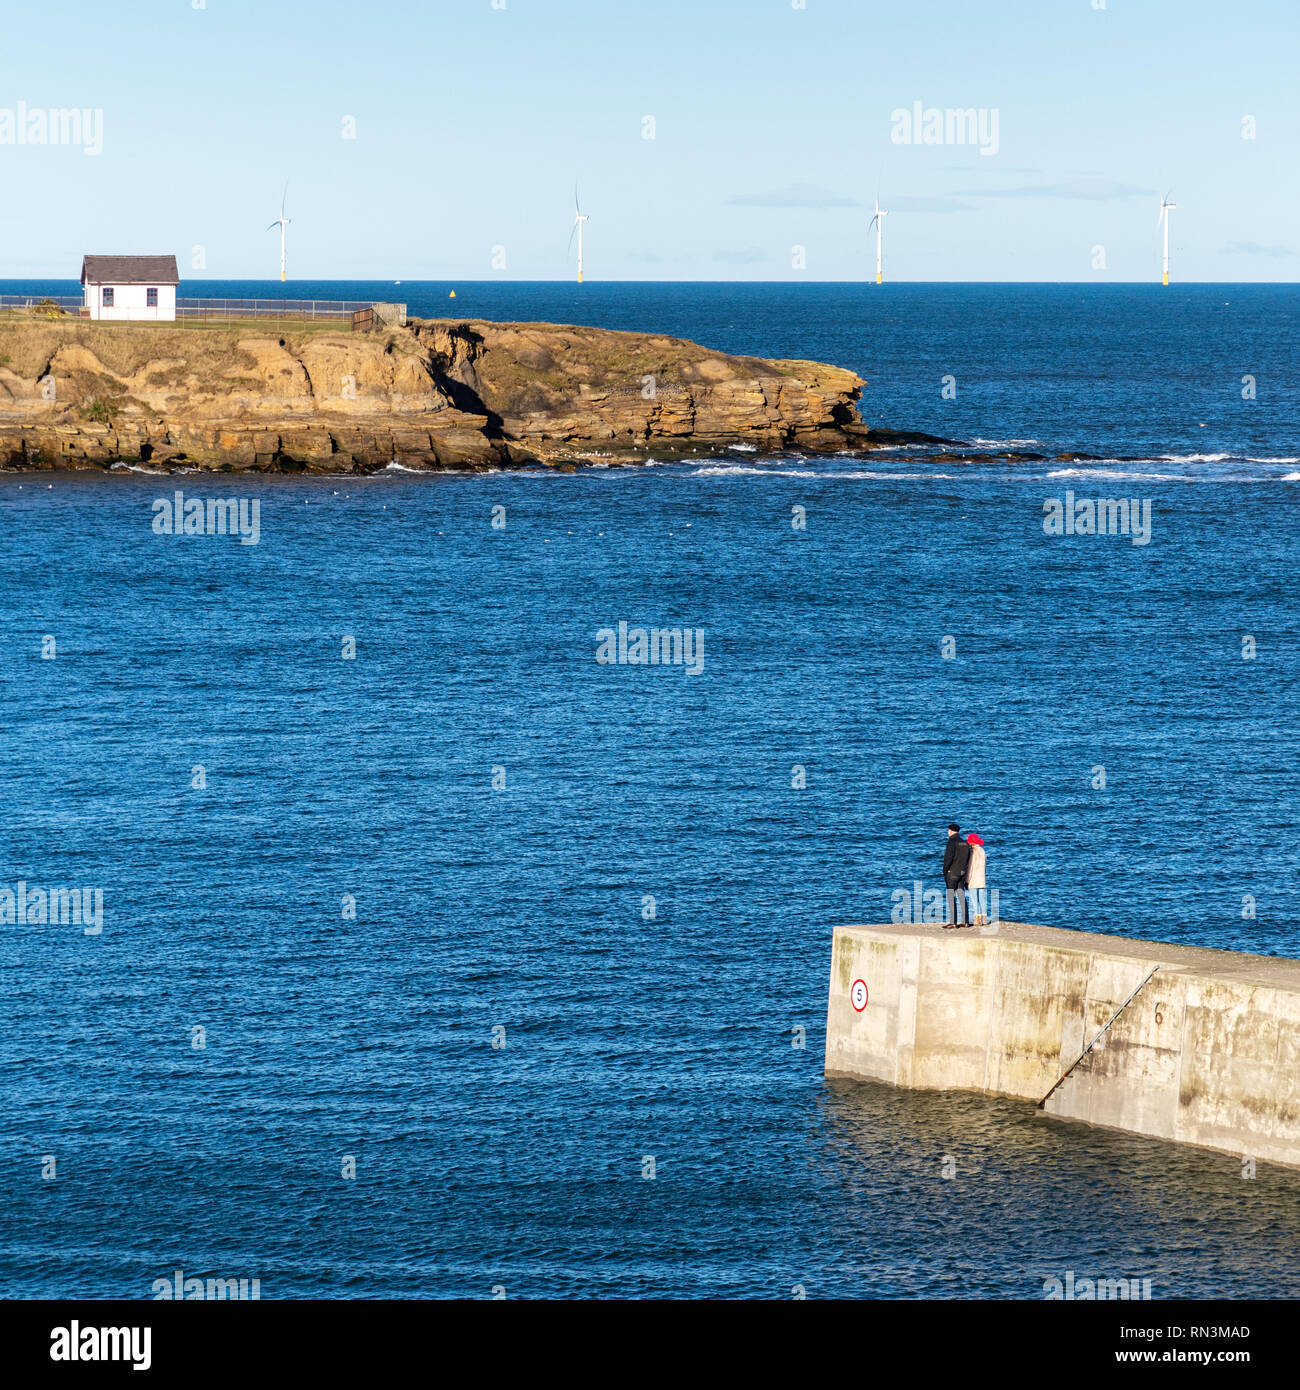 Tynemouth, England, UK - February 4, 2019: A couple walk along the breakwater of Cullercoats Harbour on the North Sea coast of Tyneside. Stock Photo